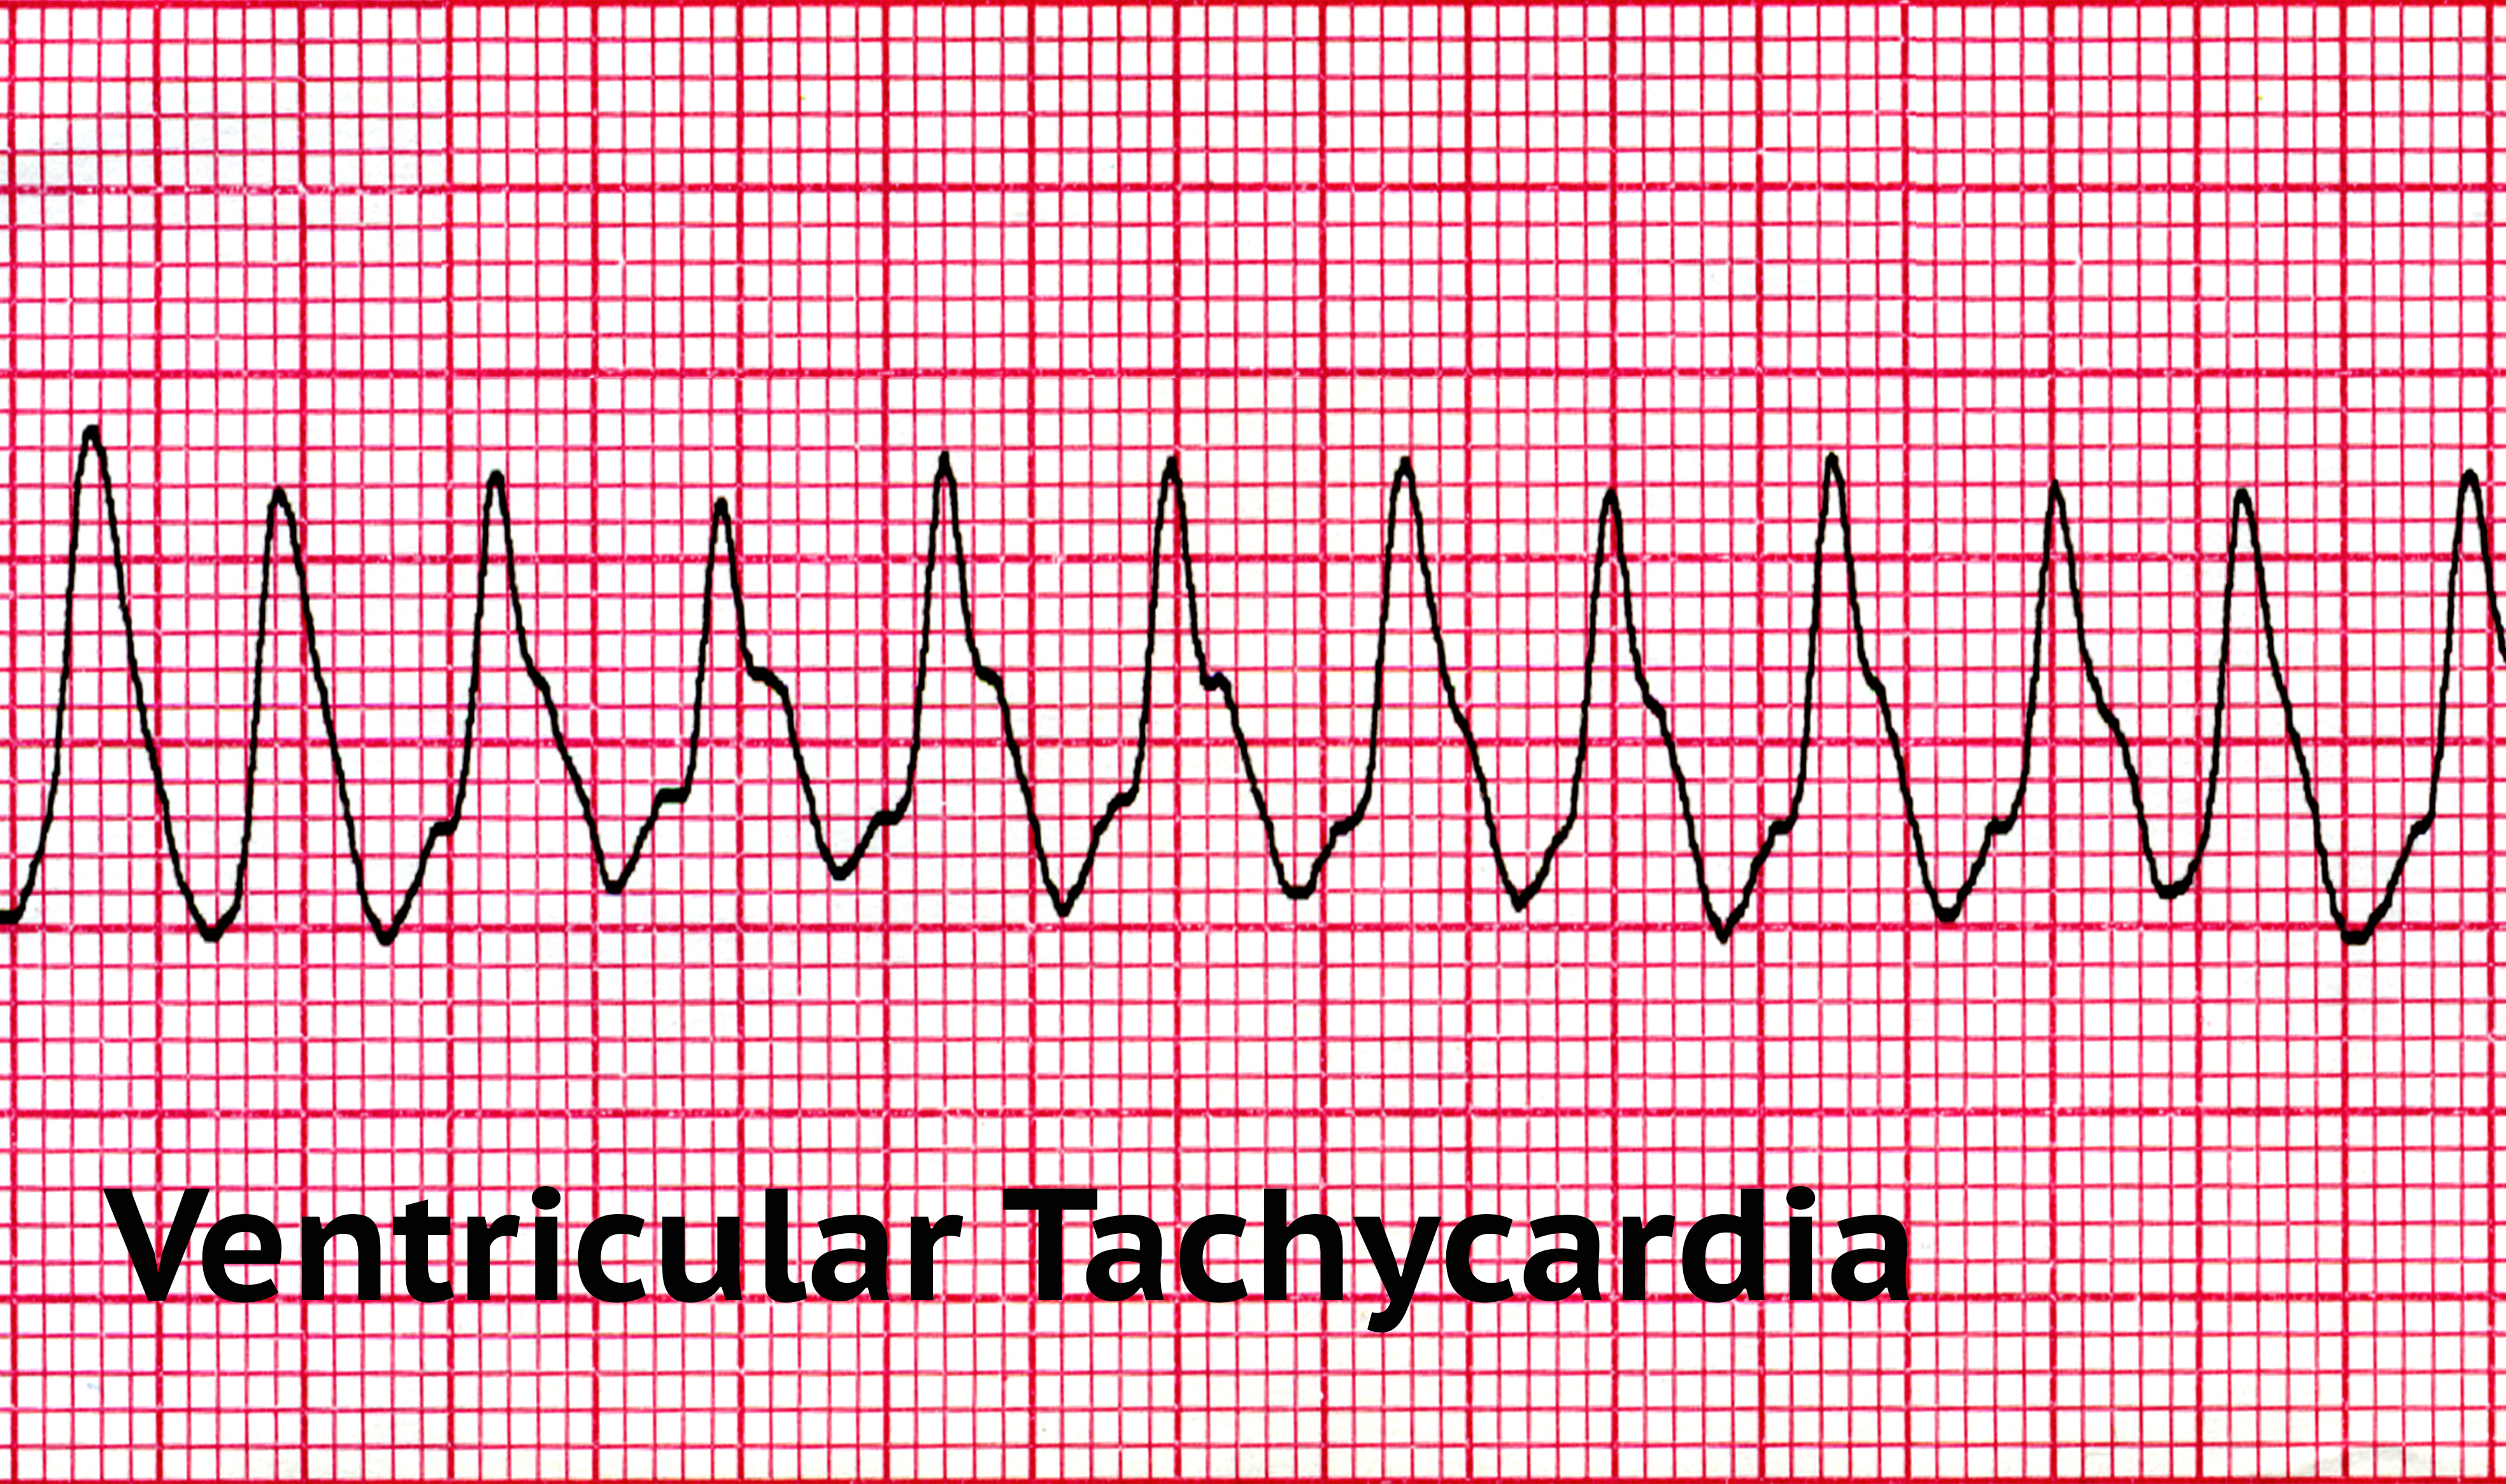 Know more about Ventricular Tachycardia